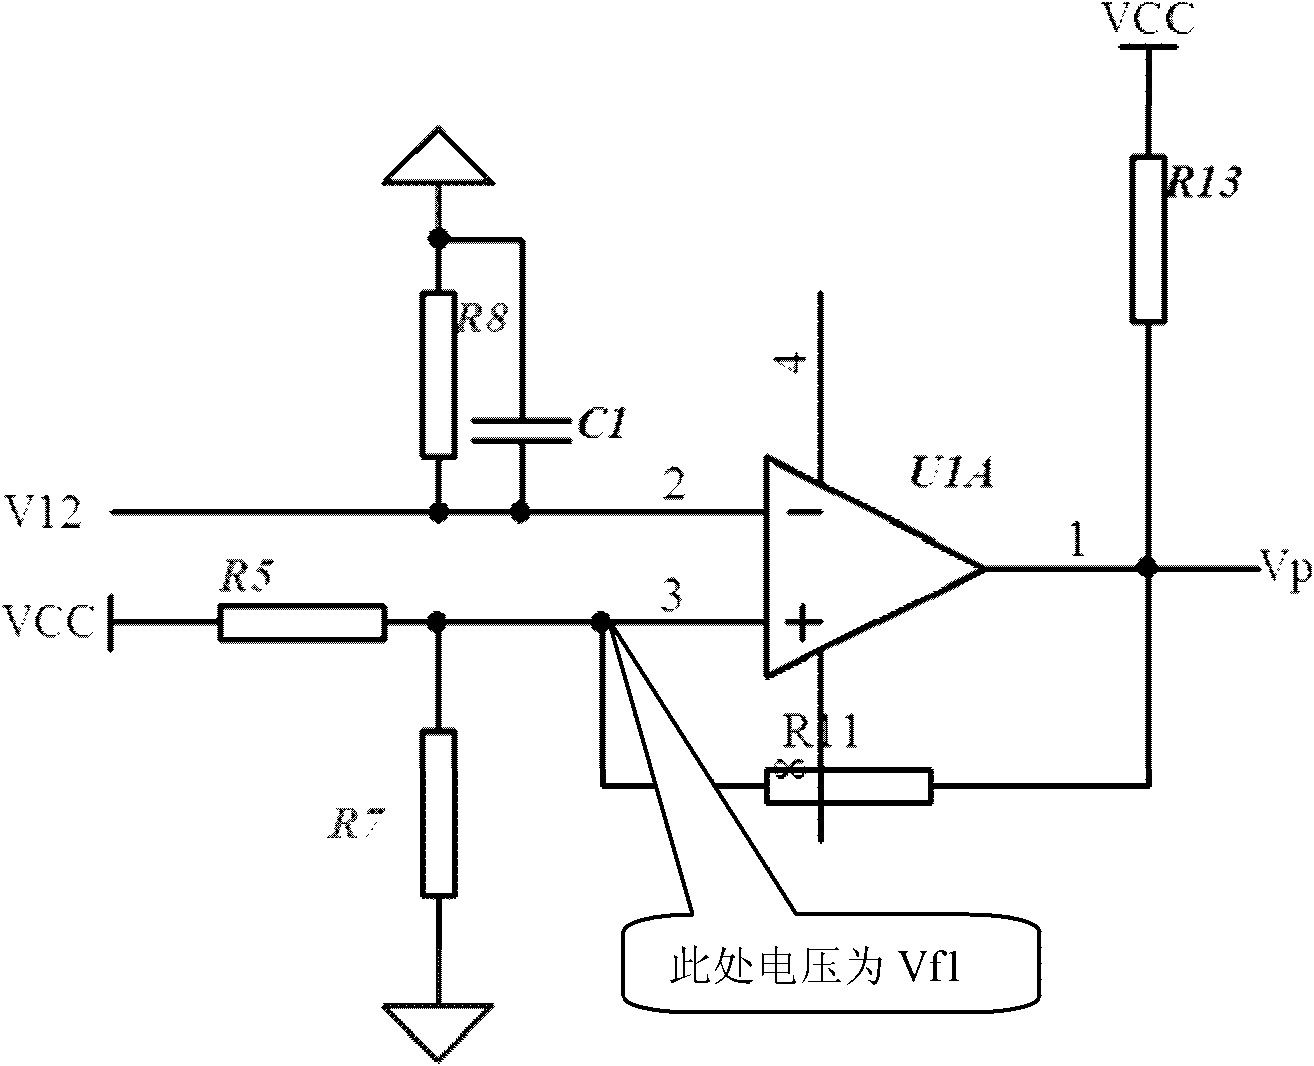 Over-voltage and over-current hardware protection circuit and DC power supply circuit